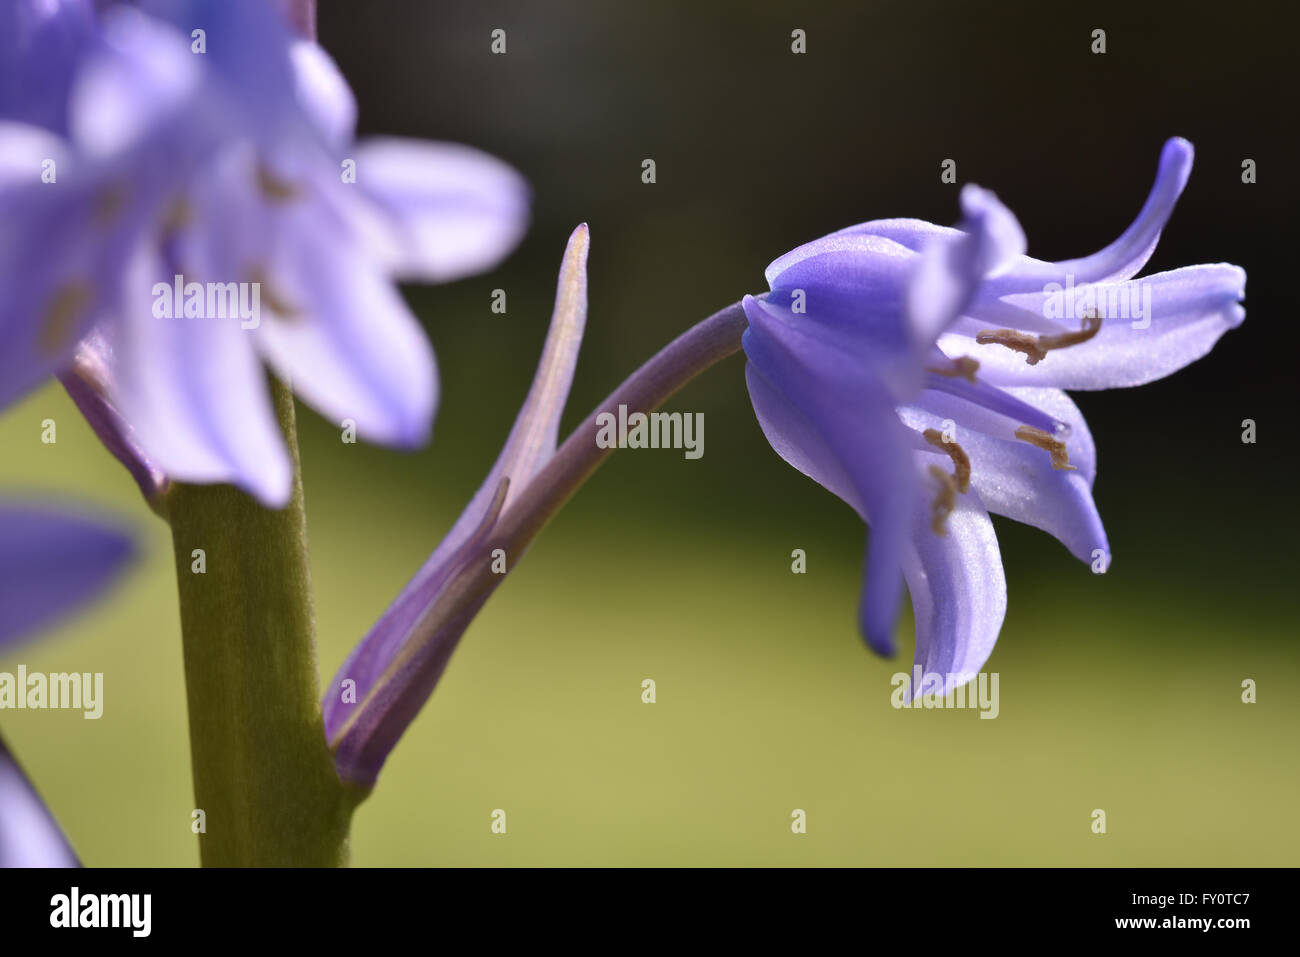 Close up photograph of a bluebell showing anther and stigma in sharp focus on an out of focus background. Stock Photo